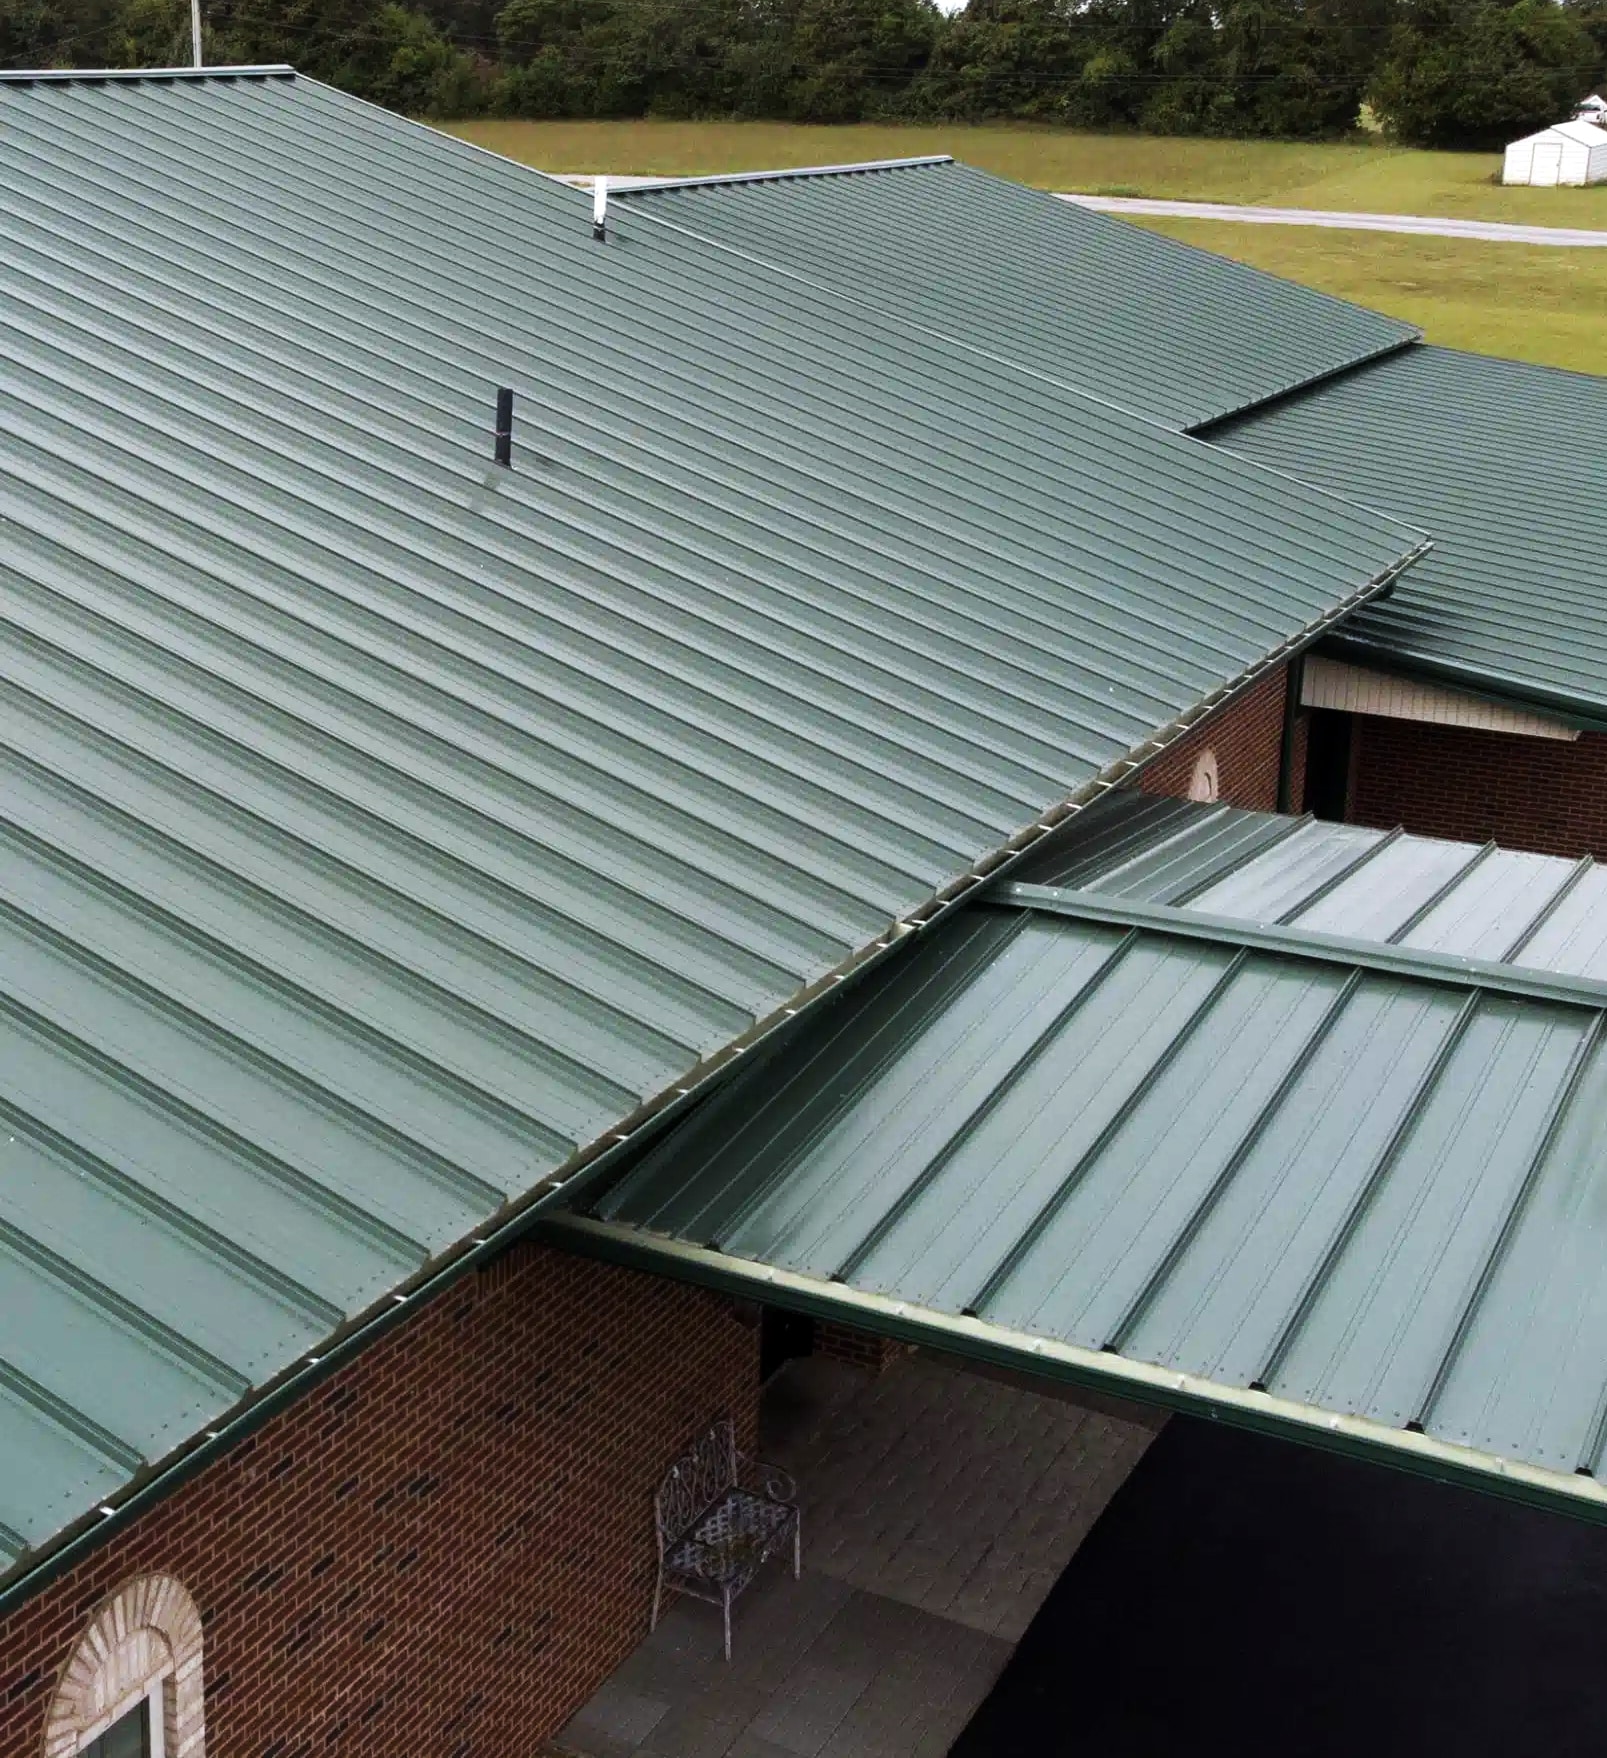 Roof made from Standing Seam Panels